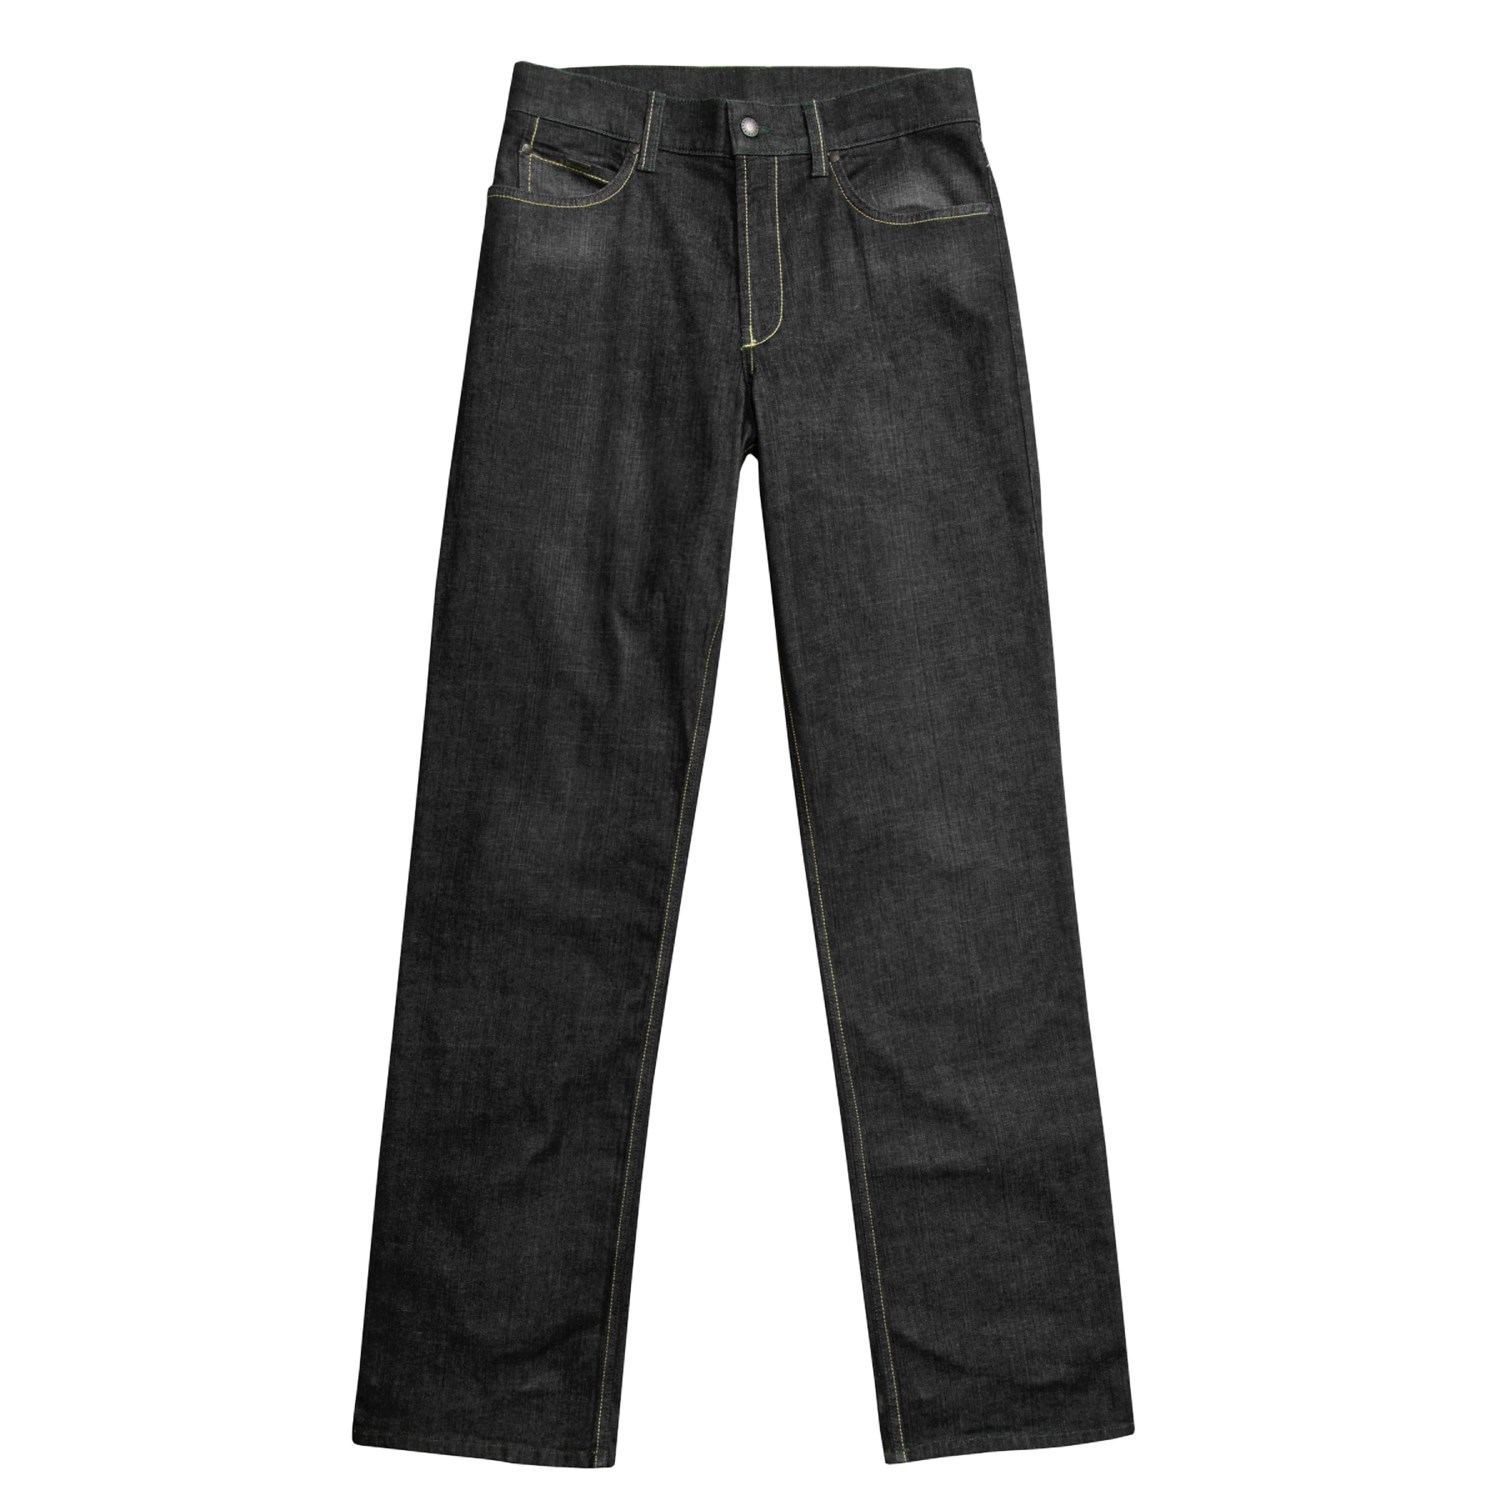 Barbour Rugged Jeans (For Men) 2031M - Save 38%